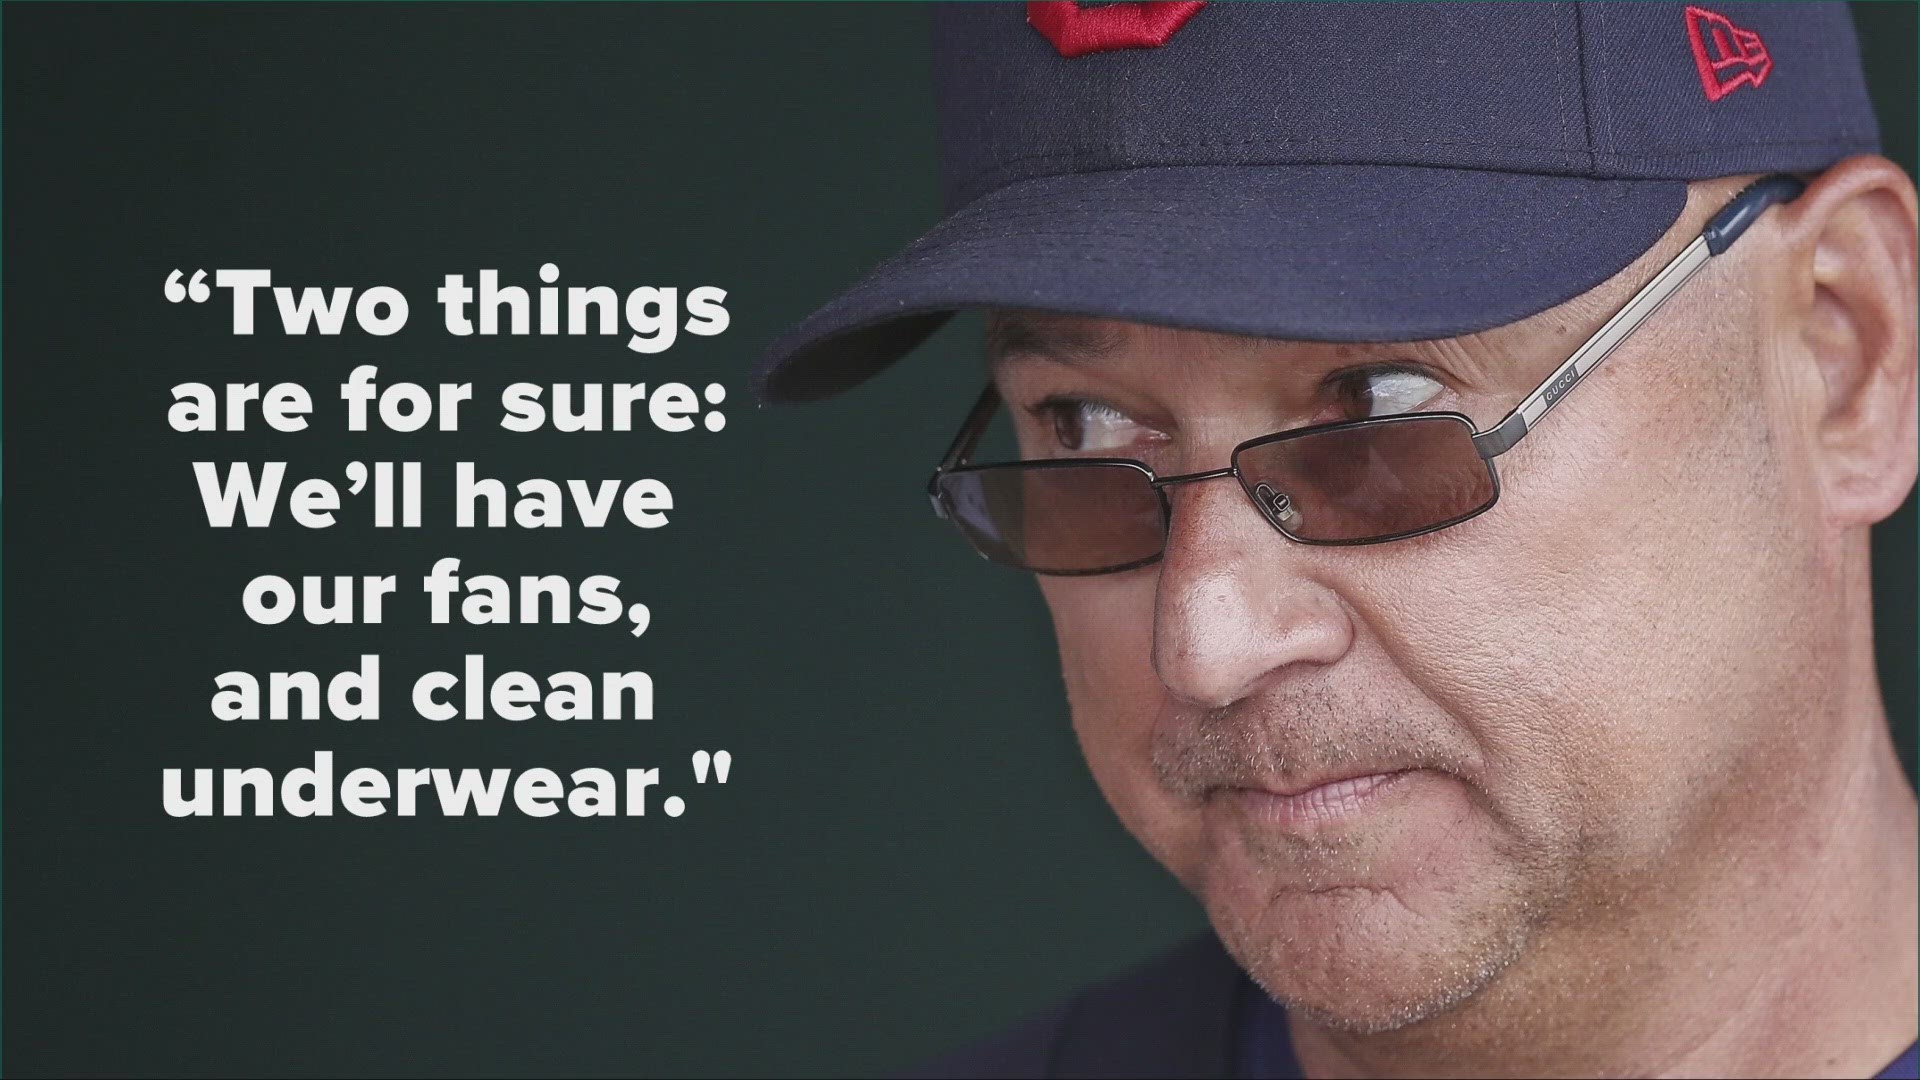 Terry Francona has a unique way with words. Mike Polk Jr. looks back at some of Tito's most memorable soundbites.